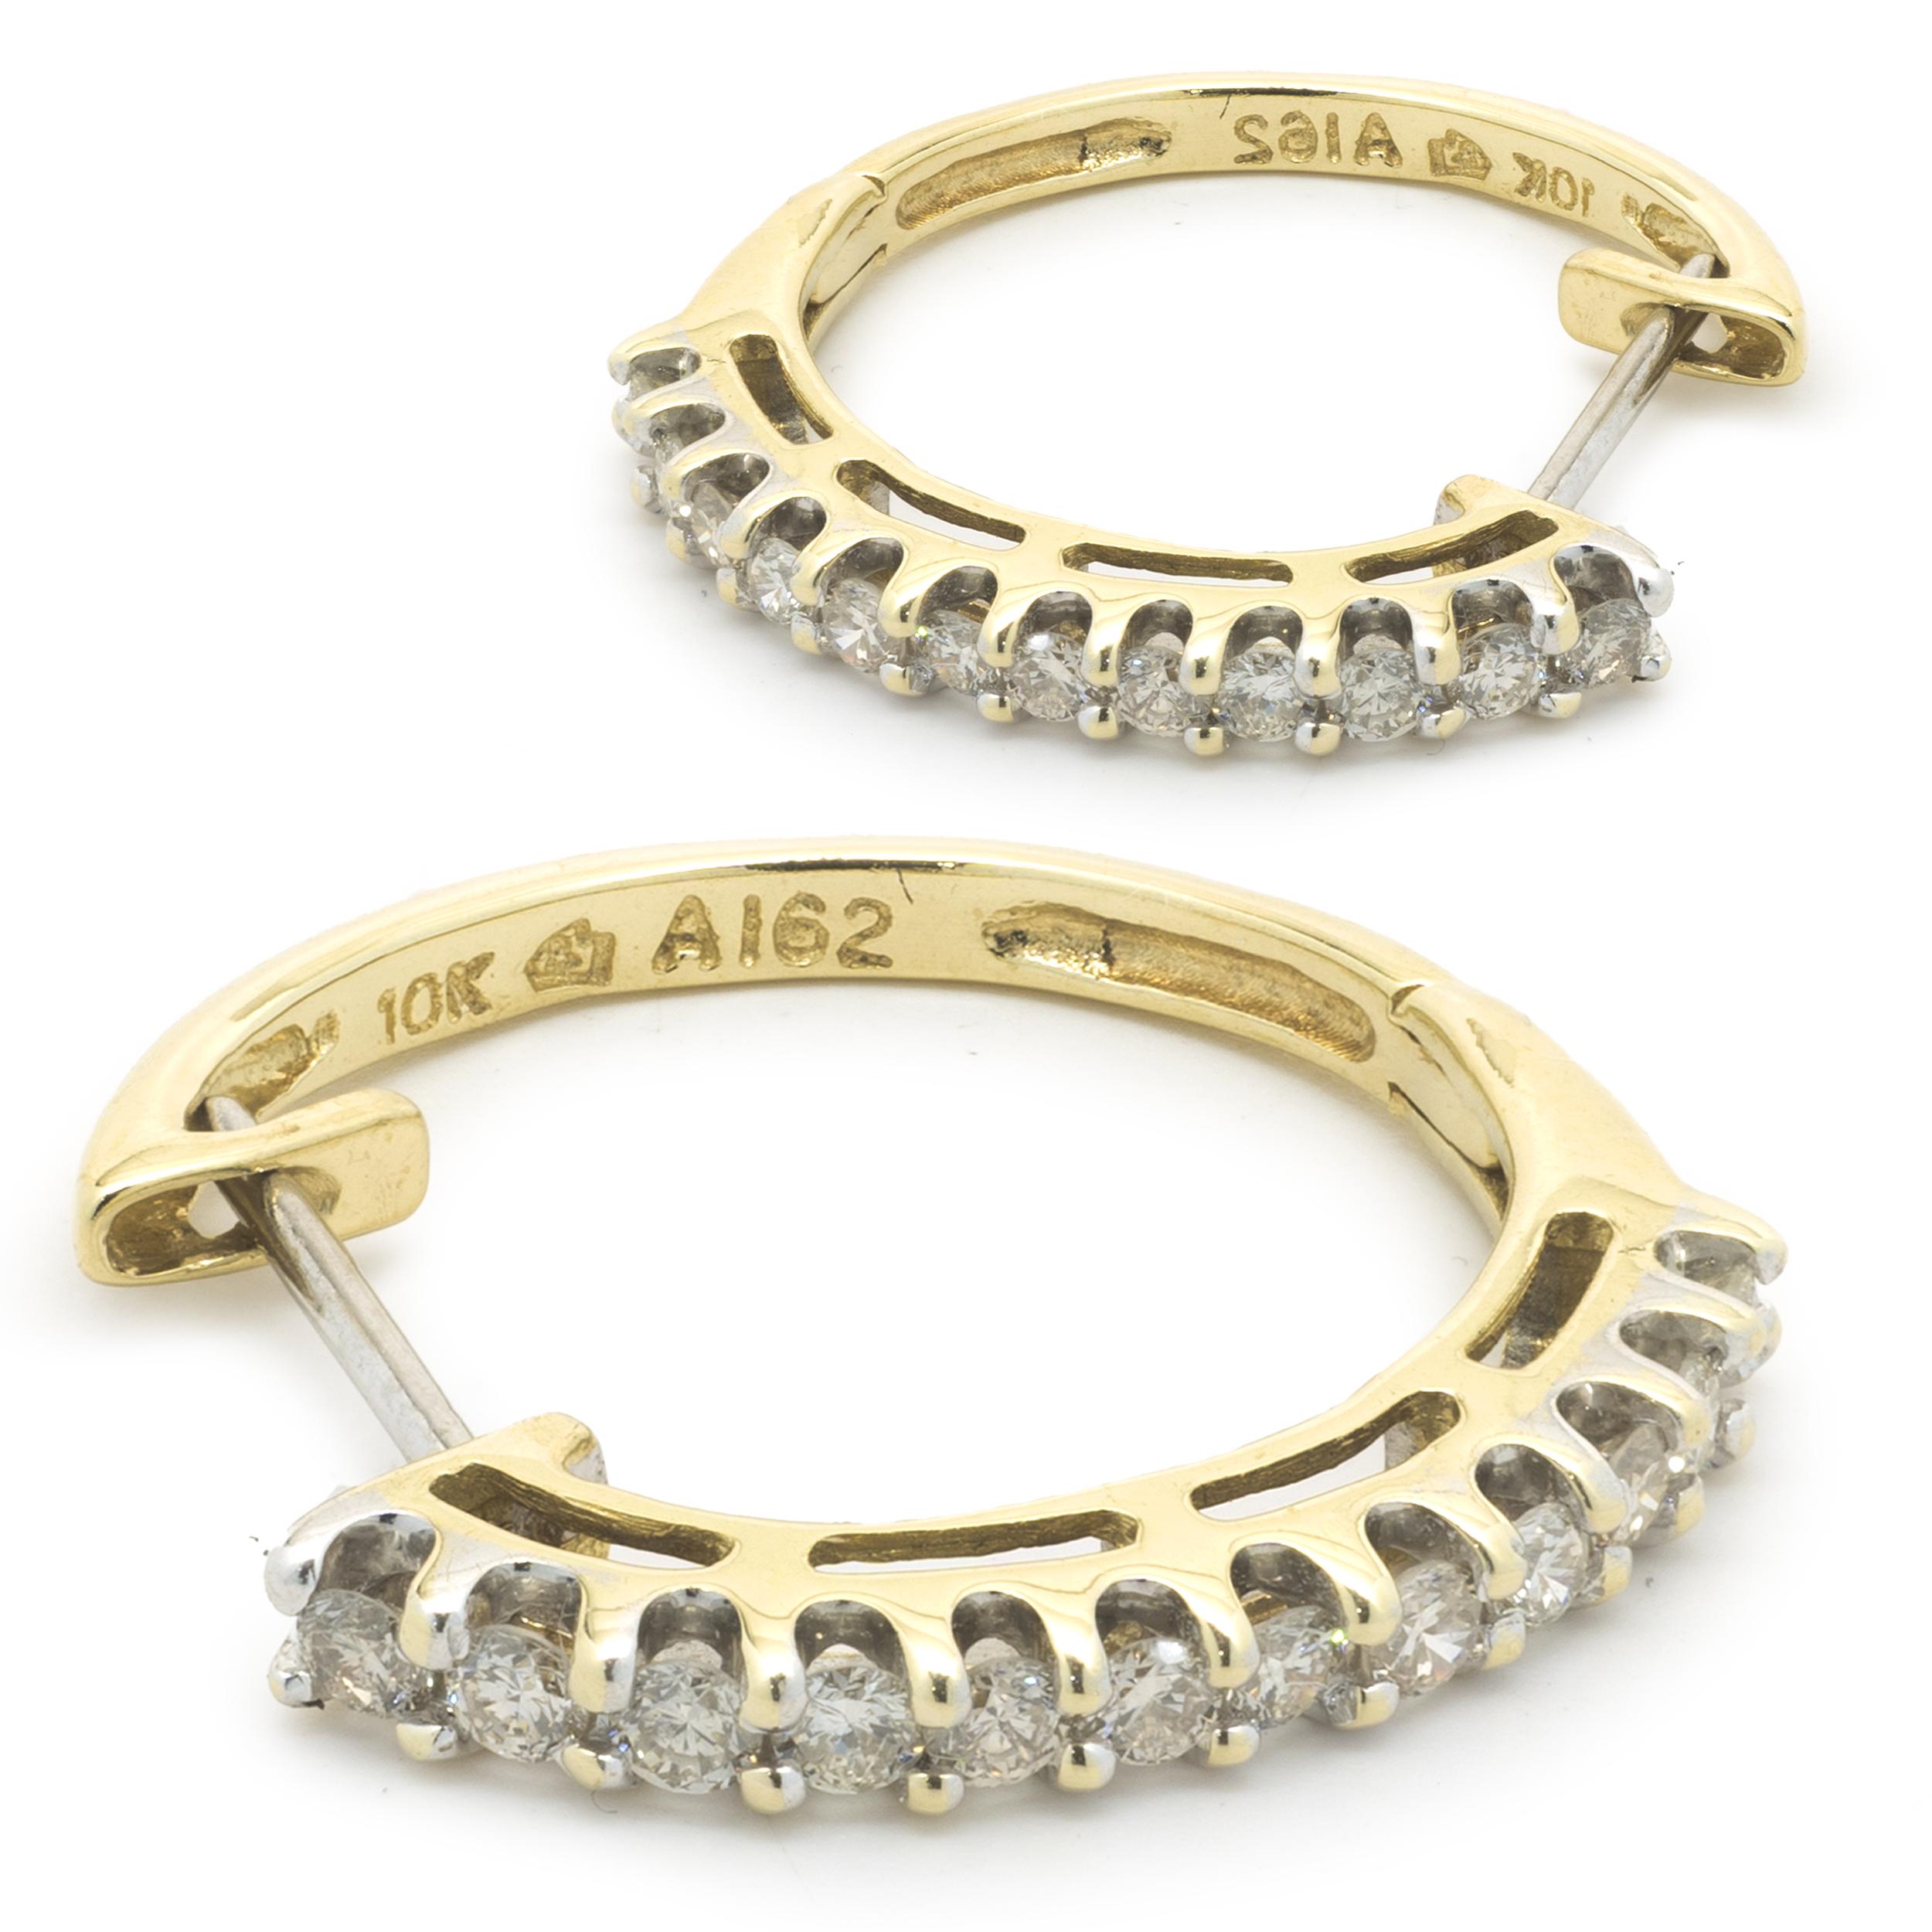 Designer: custom design
Material: 10K yellow gold
Diamonds: 24 round cut = .50cttw
Color: champagne 
Clarity: SI1
Dimensions: earrings measure 19.40 X 2.60mm
Fastenings: post with snap backs
Weight: 2.96 grams
